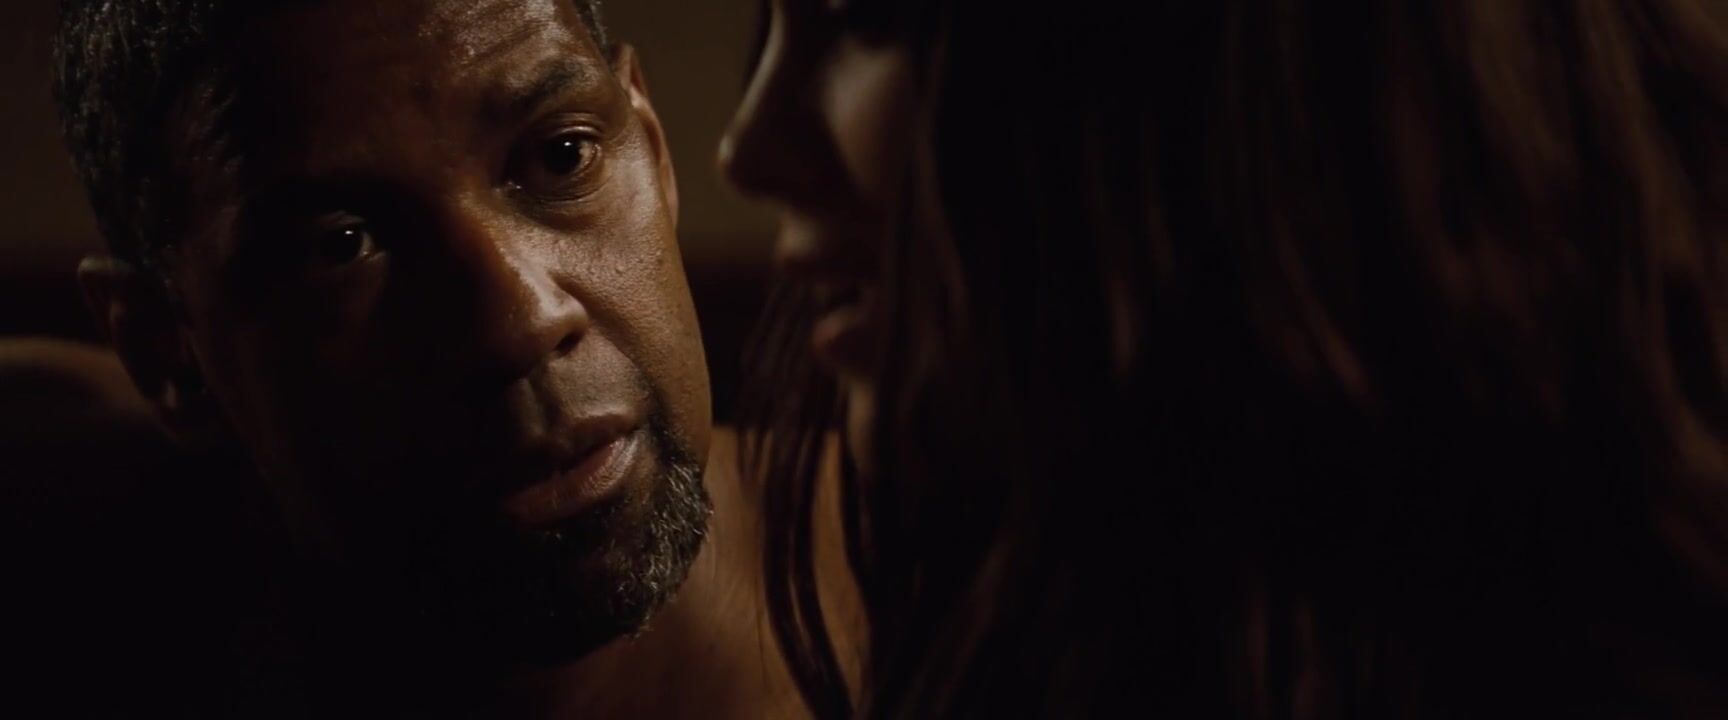 UpForIt Paula Patton manages to excite black man during the naked moment from 2 Guns movie Cum On Tits